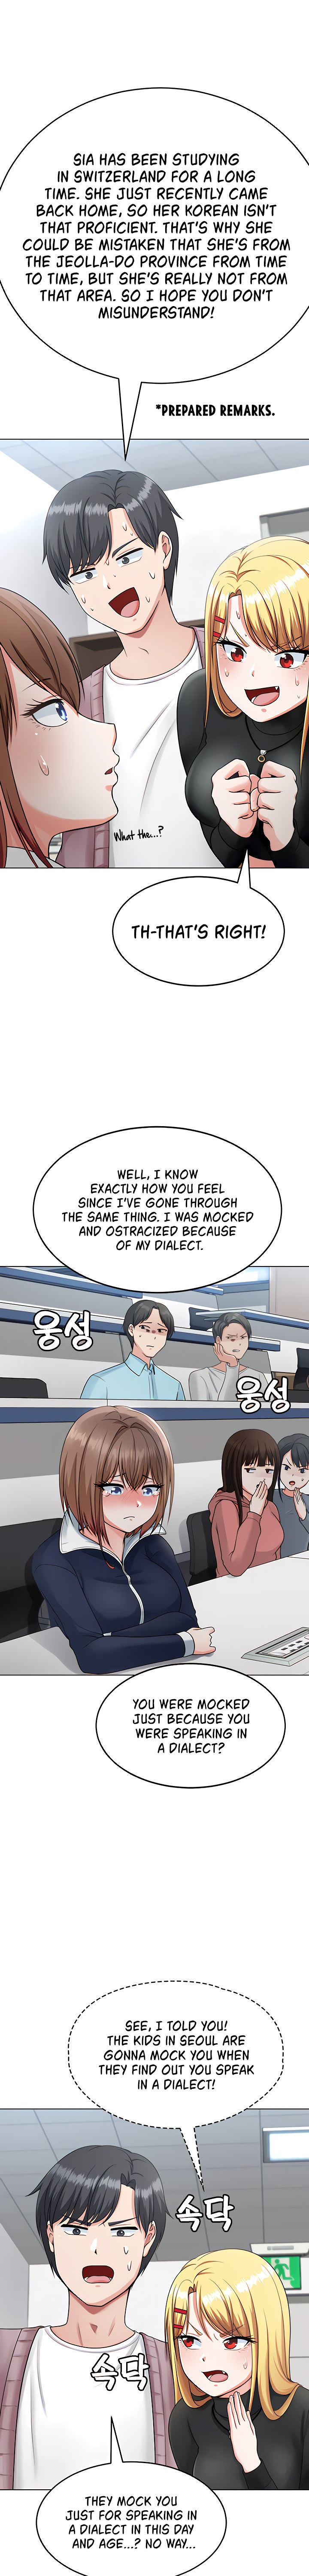 Seoul Kids These Days - Chapter 5 Page 21